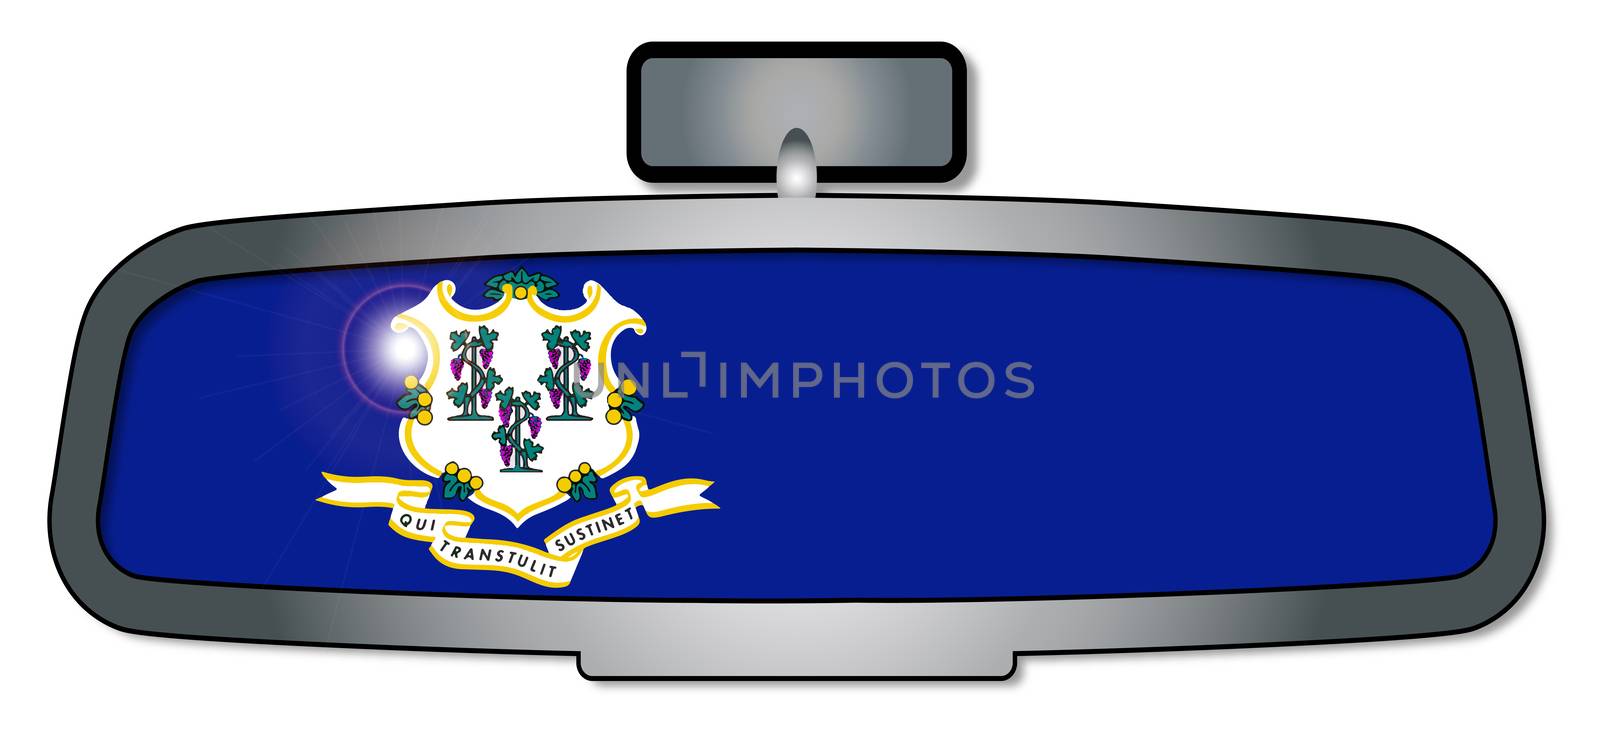 A vehicle rear view mirror with the flag of the state of Connecticut